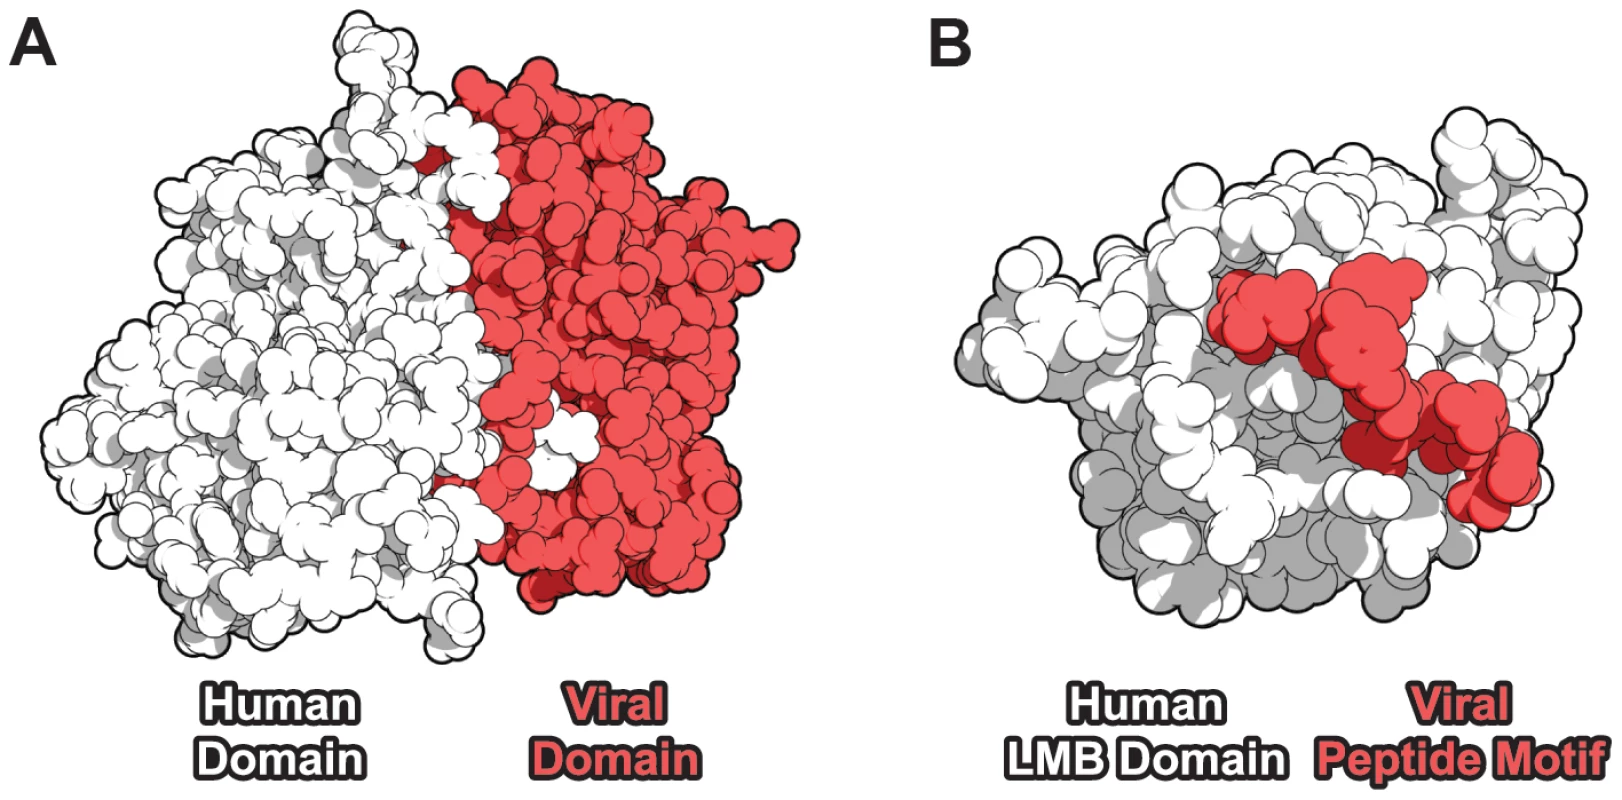 Domain-centric mechanisms of host-virus protein-protein interaction.